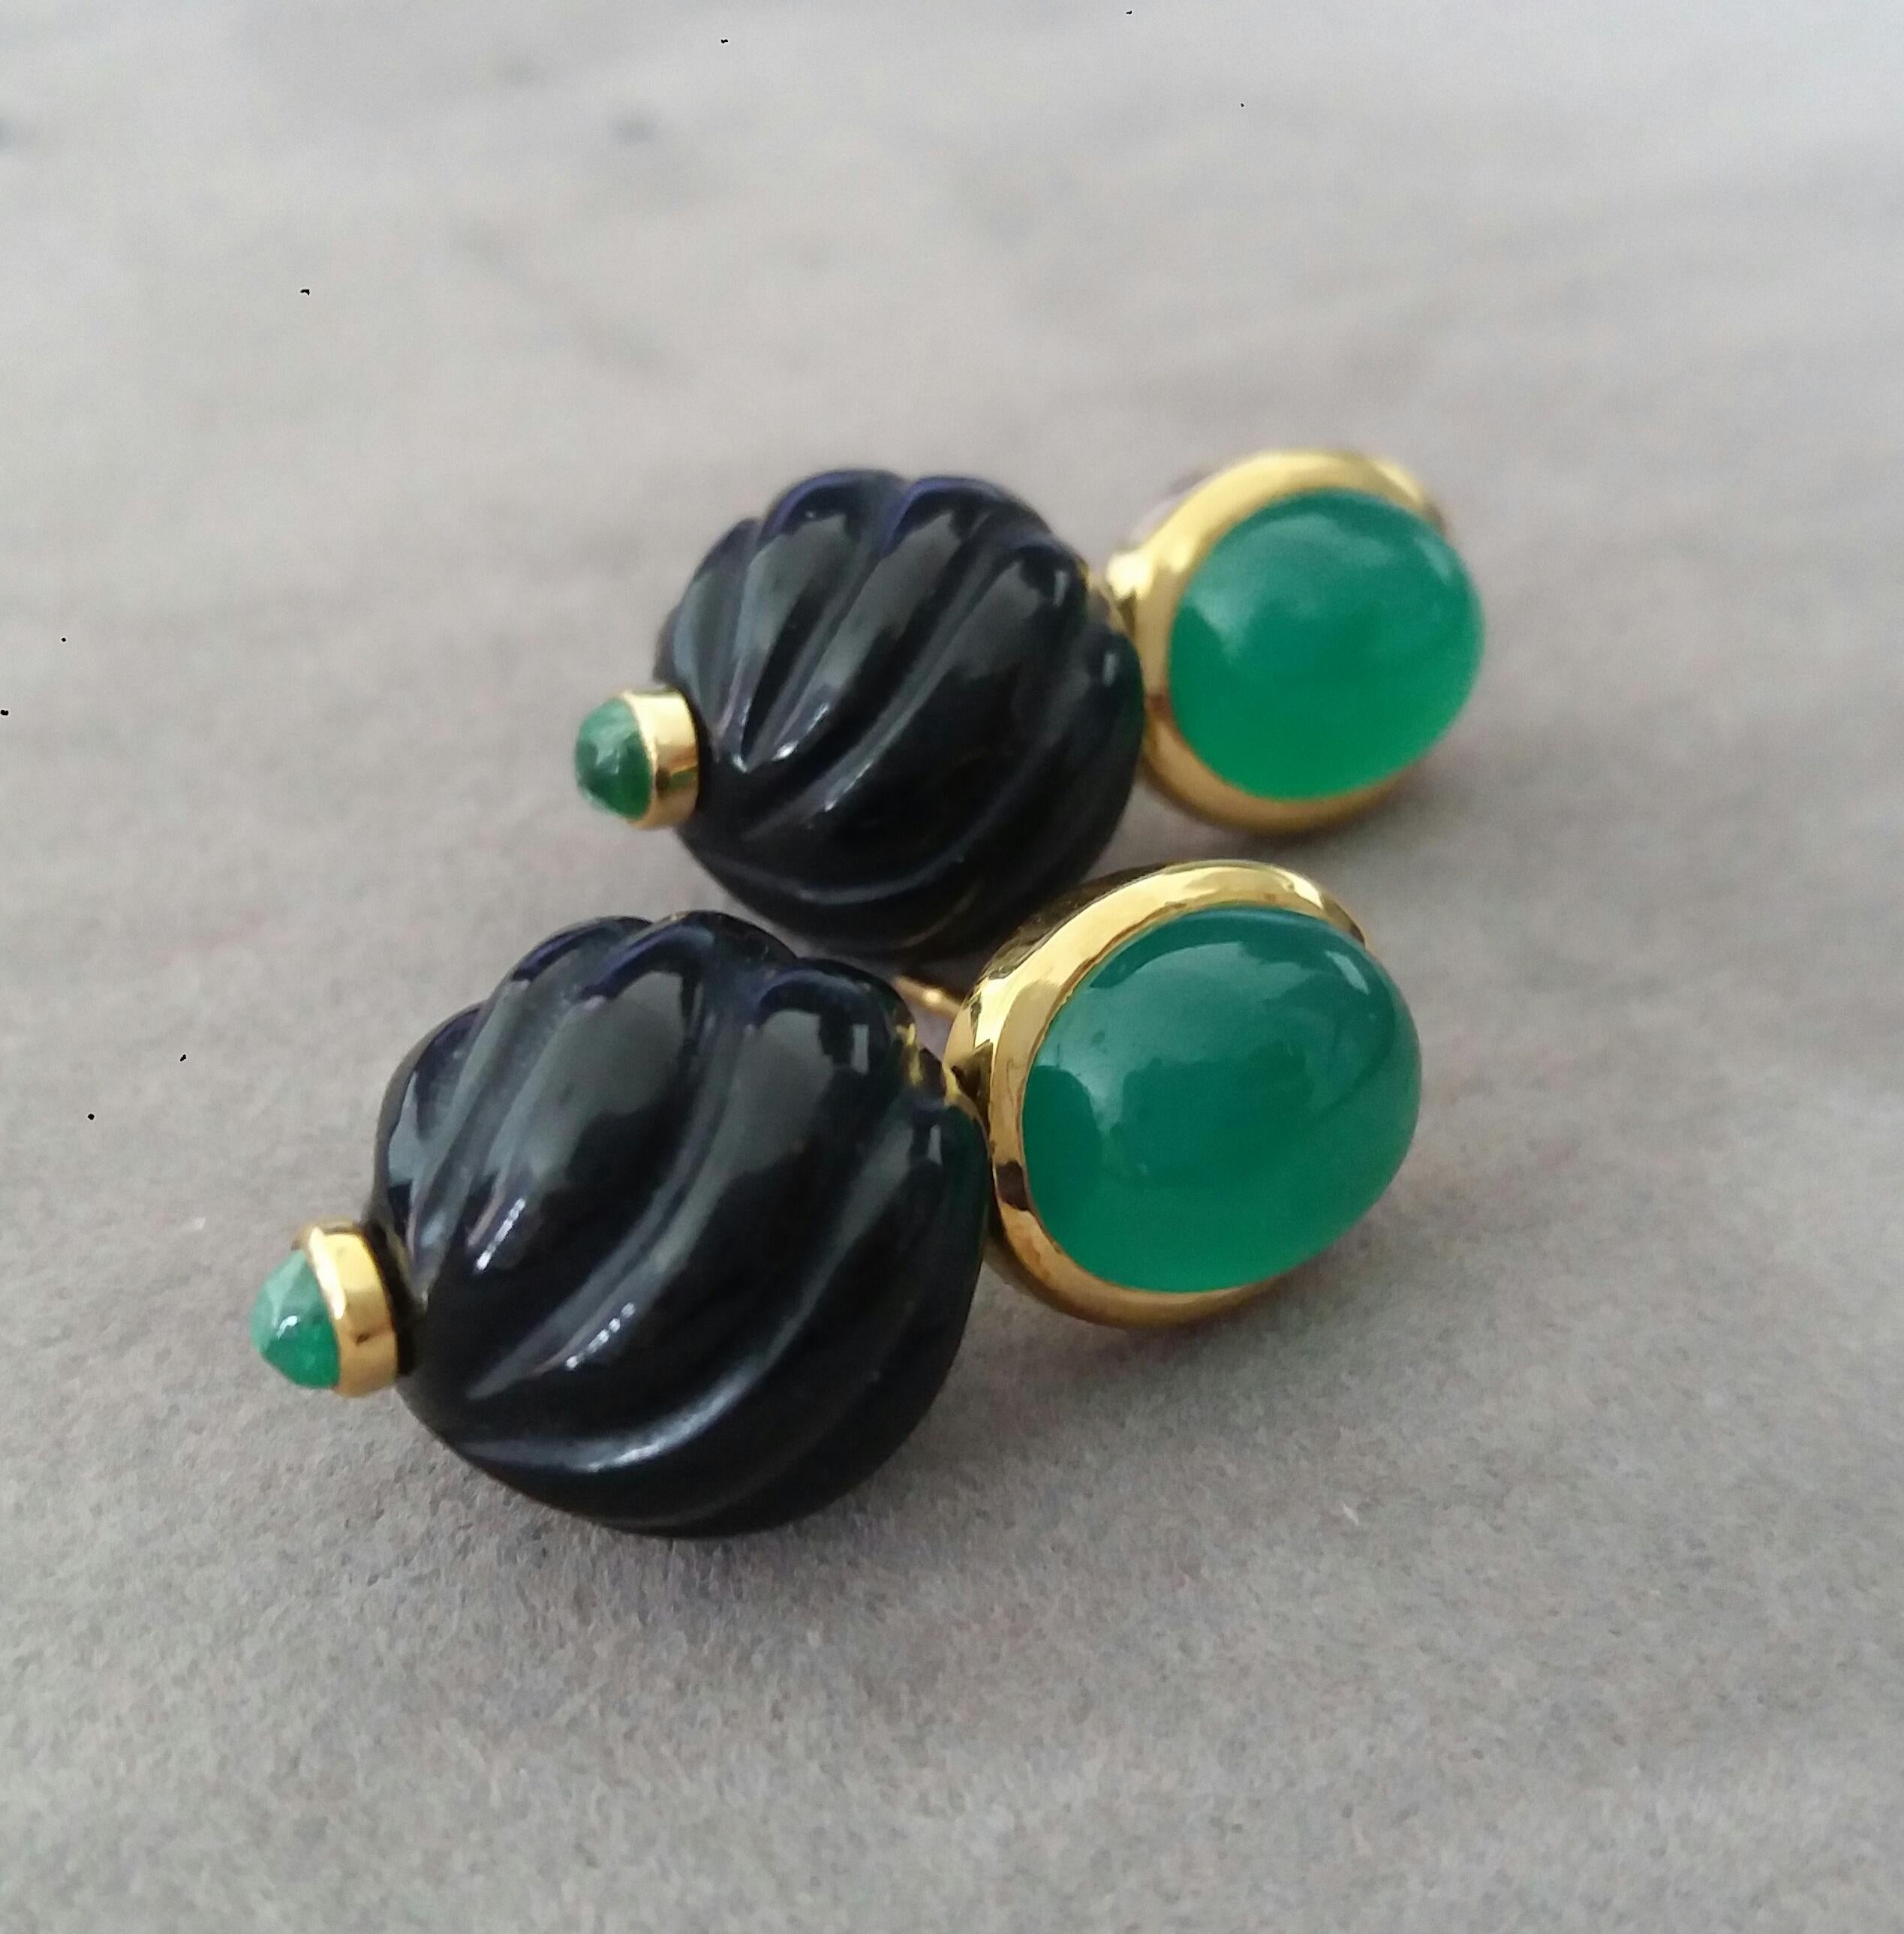 Green Onyx 14k Gold Black Onyx Emerald Cabs Carved Round Beads Stud Earrings For Sale 1